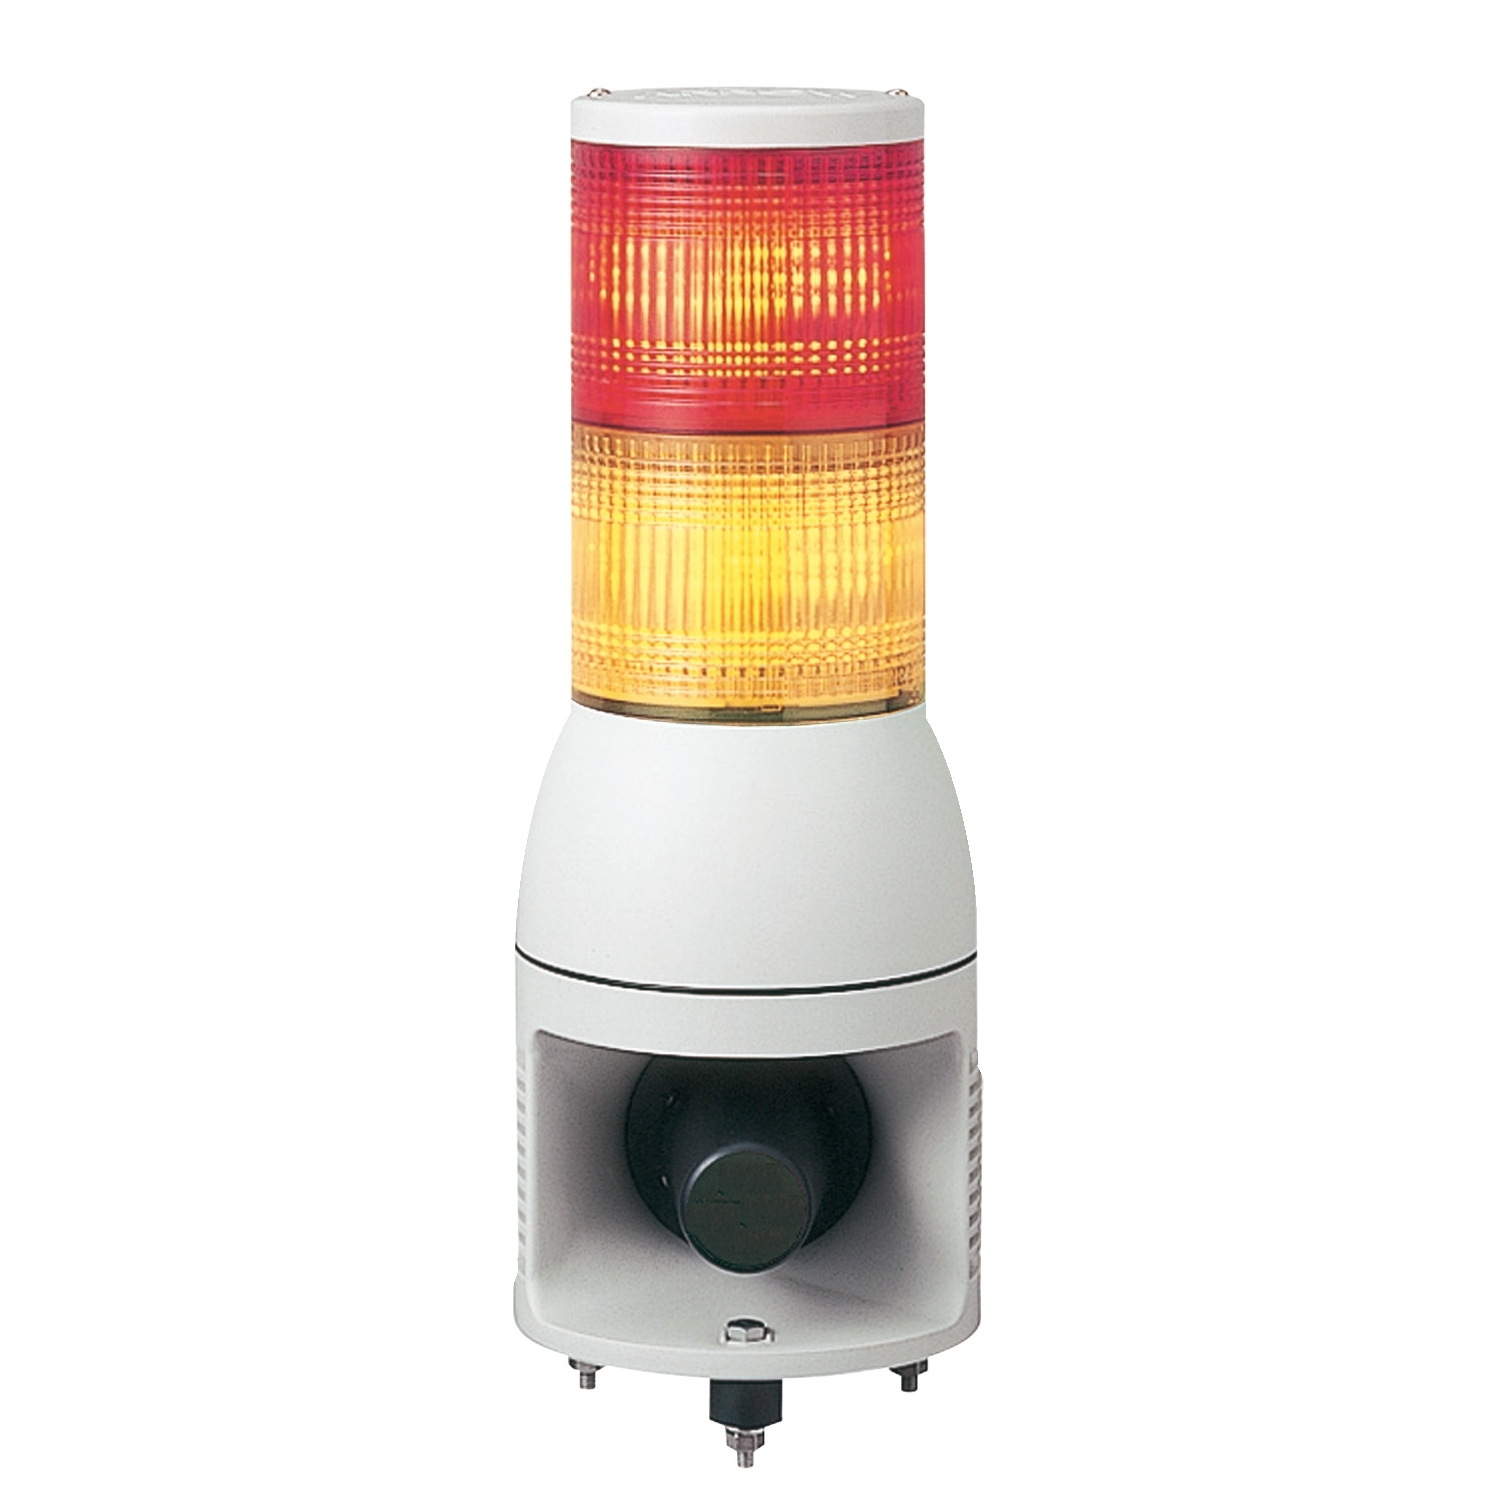 Monolithic tower light， red-orange， 100mm， base mounting， steady or flashing， with siren 0...102 dB， IP54， 100…240 V AC